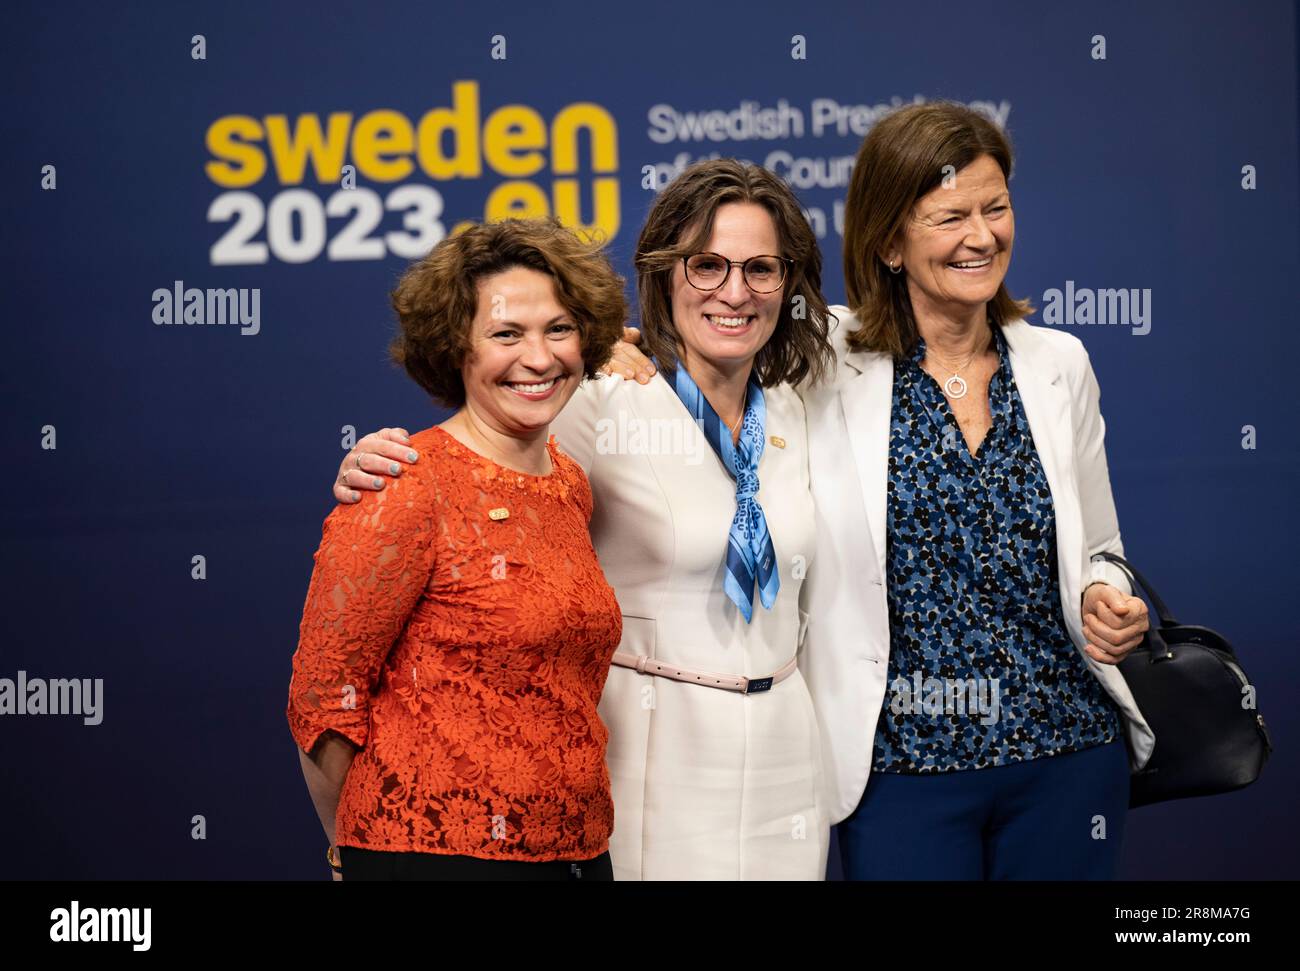 Stockholm, Sweden. 22nd June, 2023. STOCKHOLM 20230622 Sweden minister for EU Affairs Jessika Roswall, middle, welcomes Eugenia Dumitriu-Segana, Director general, secretariat of the council, left, and Marta Arpio Santacruz, Director general of the council, to Informal meeting of the General Affairs Council at Arlanda Xpo north of Stockholm city. Photo: Pontus Lundahl/TT/kod 10050 Credit: TT News Agency/Alamy Live News Stock Photo